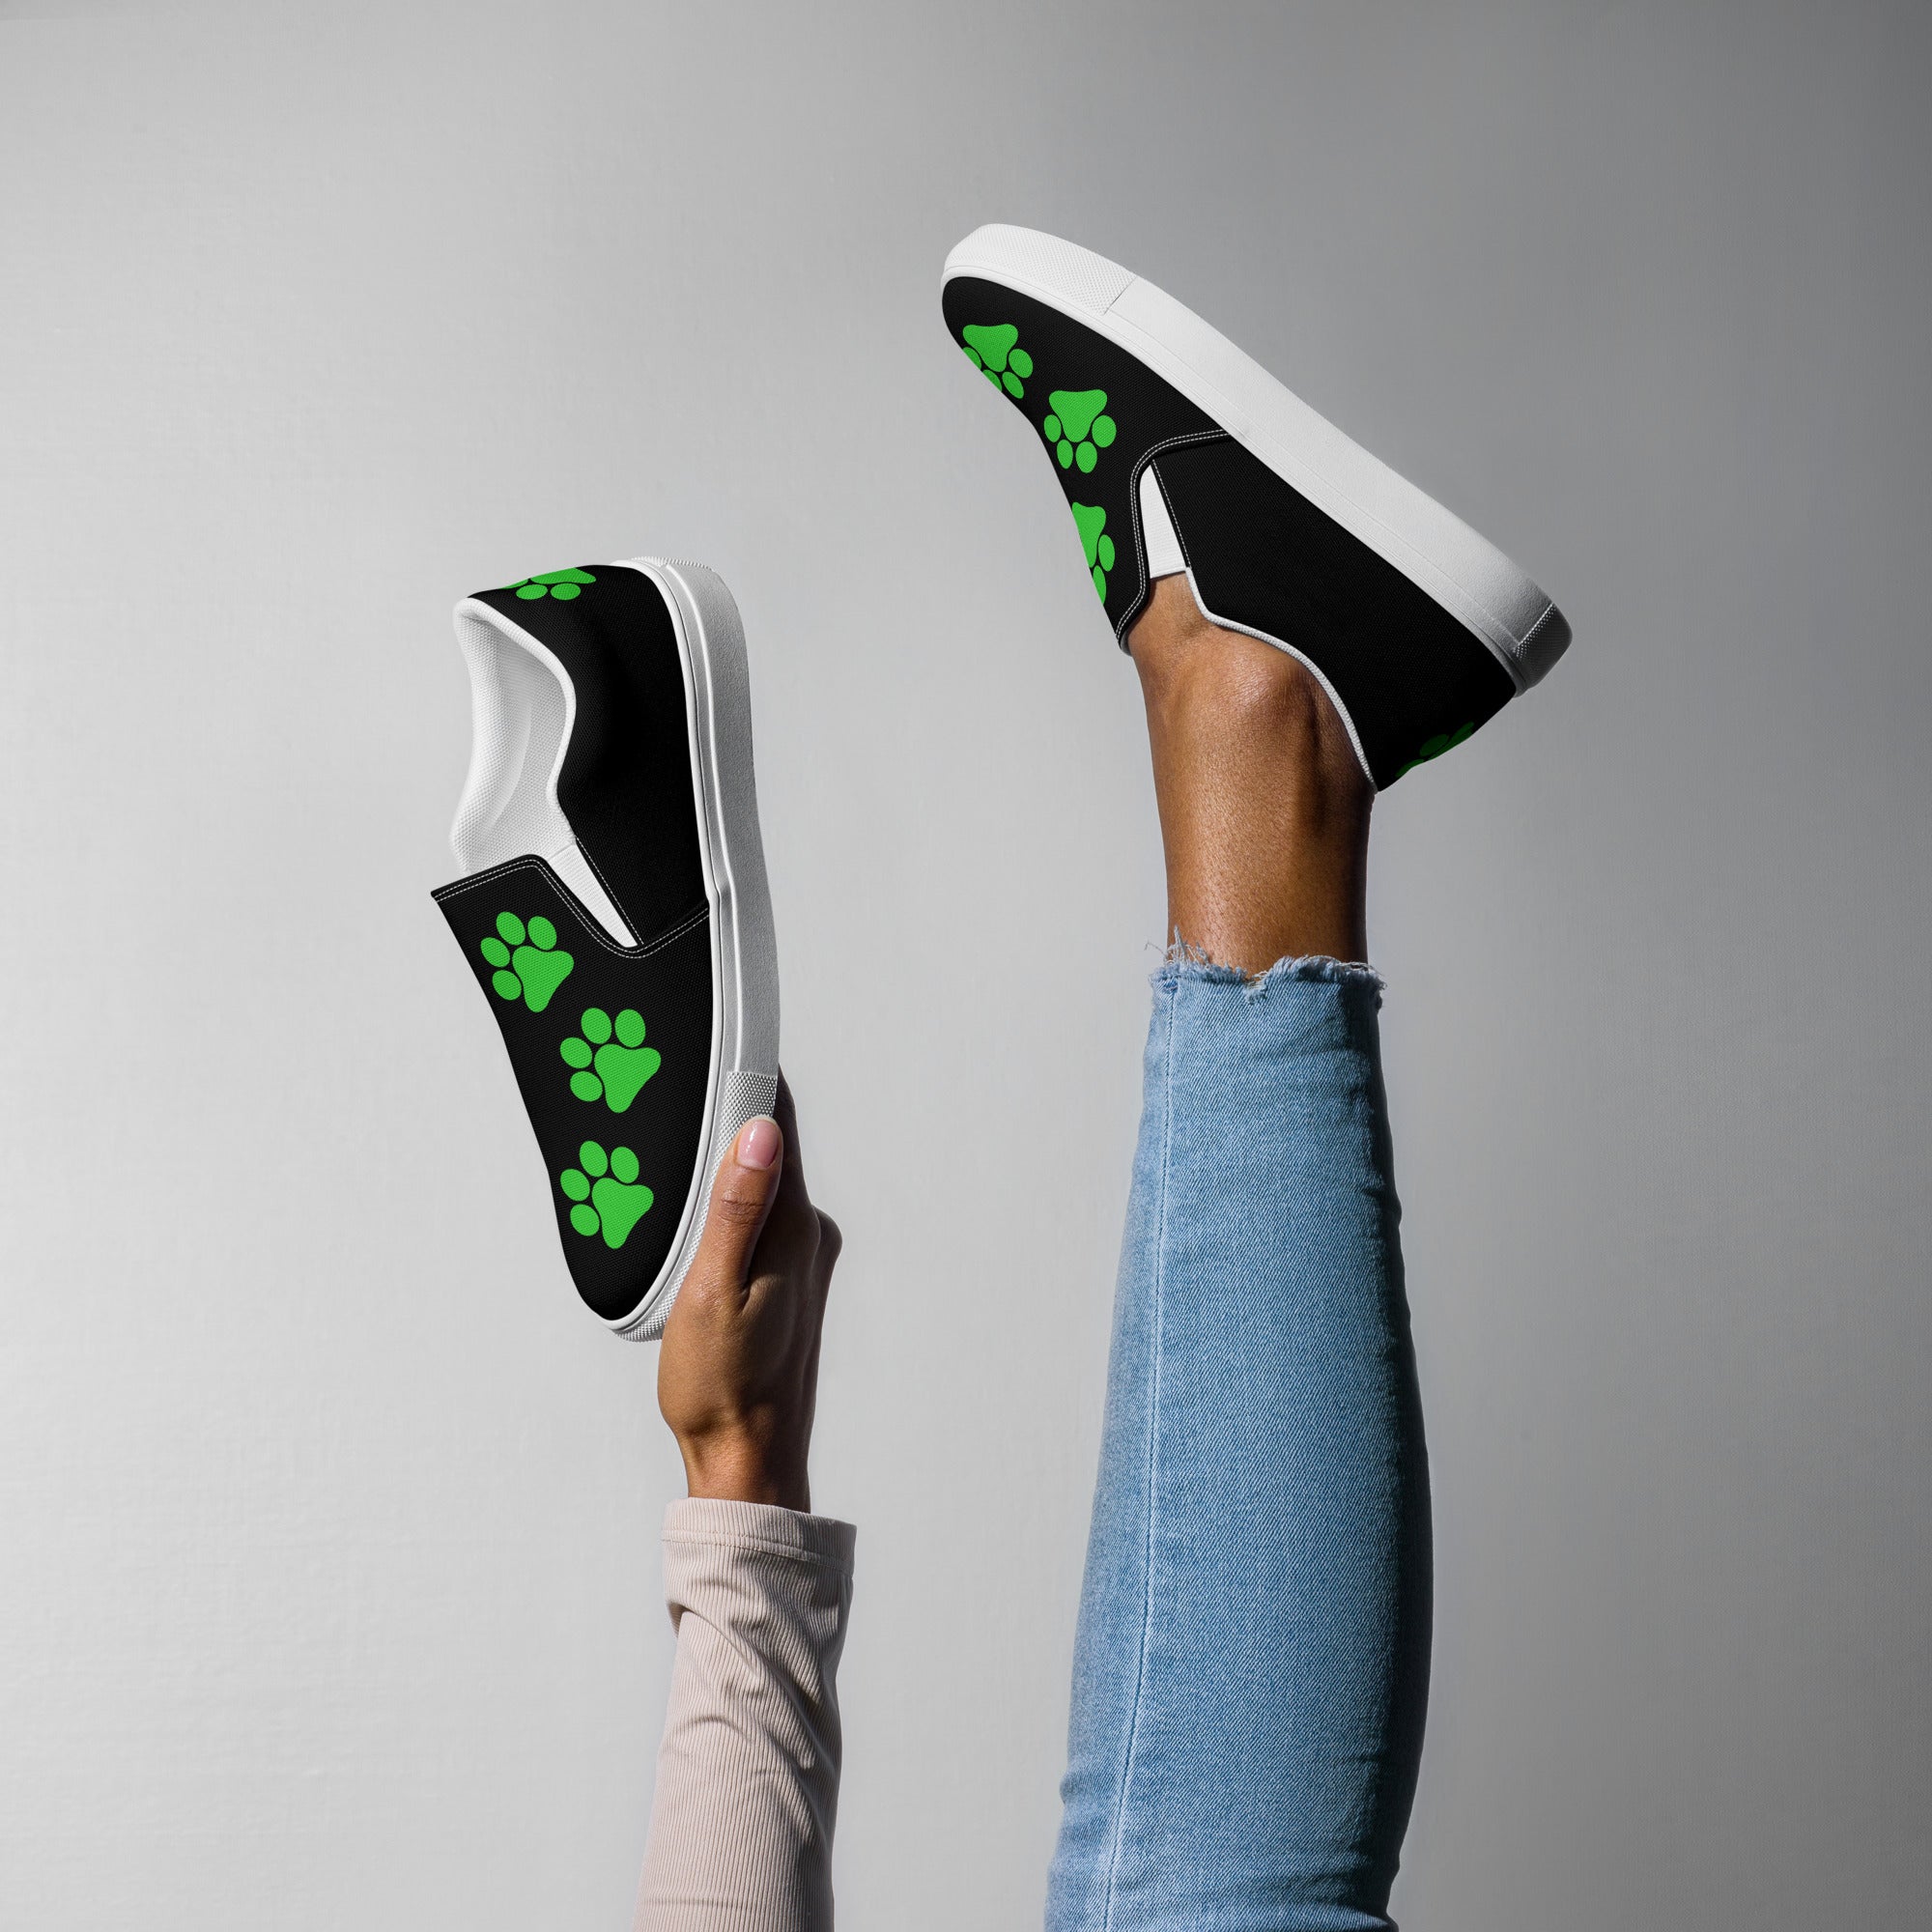 Women’s slip-on Black Lime Paw shoes